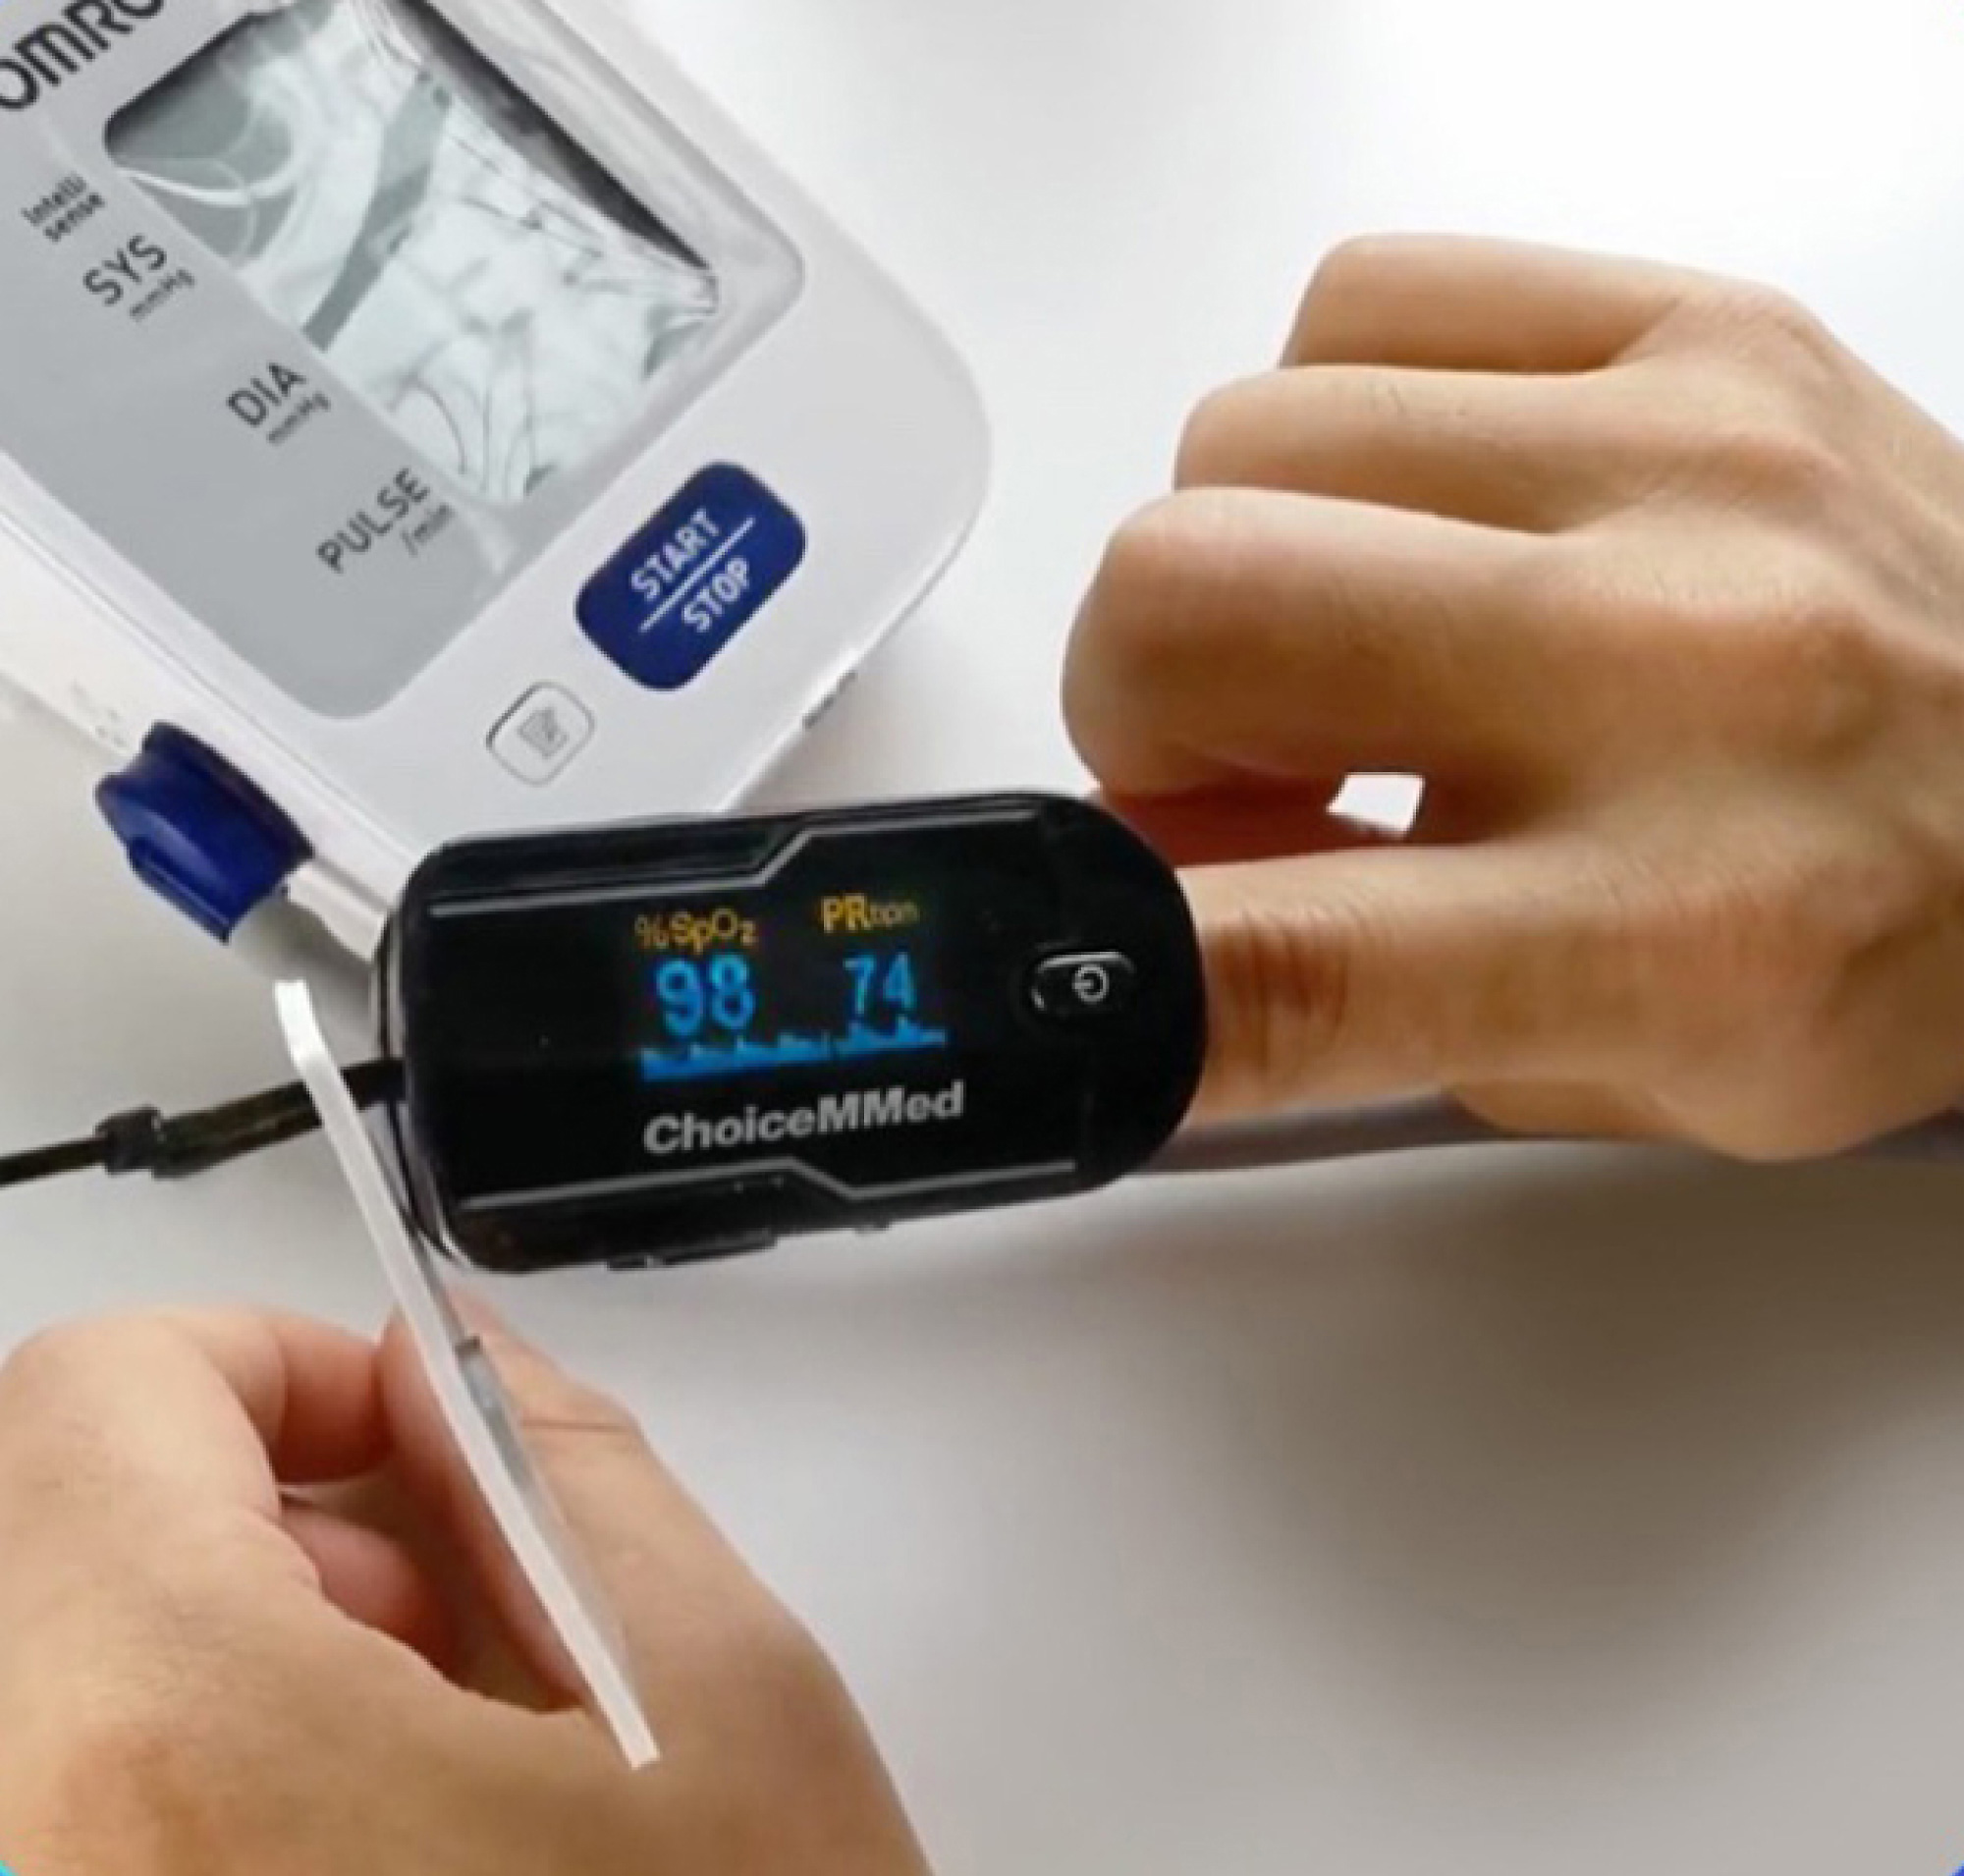 A person uses a fingertip pulse oximeter to measure oxygen saturation and pulse rate, displayed on the device's digital screen.